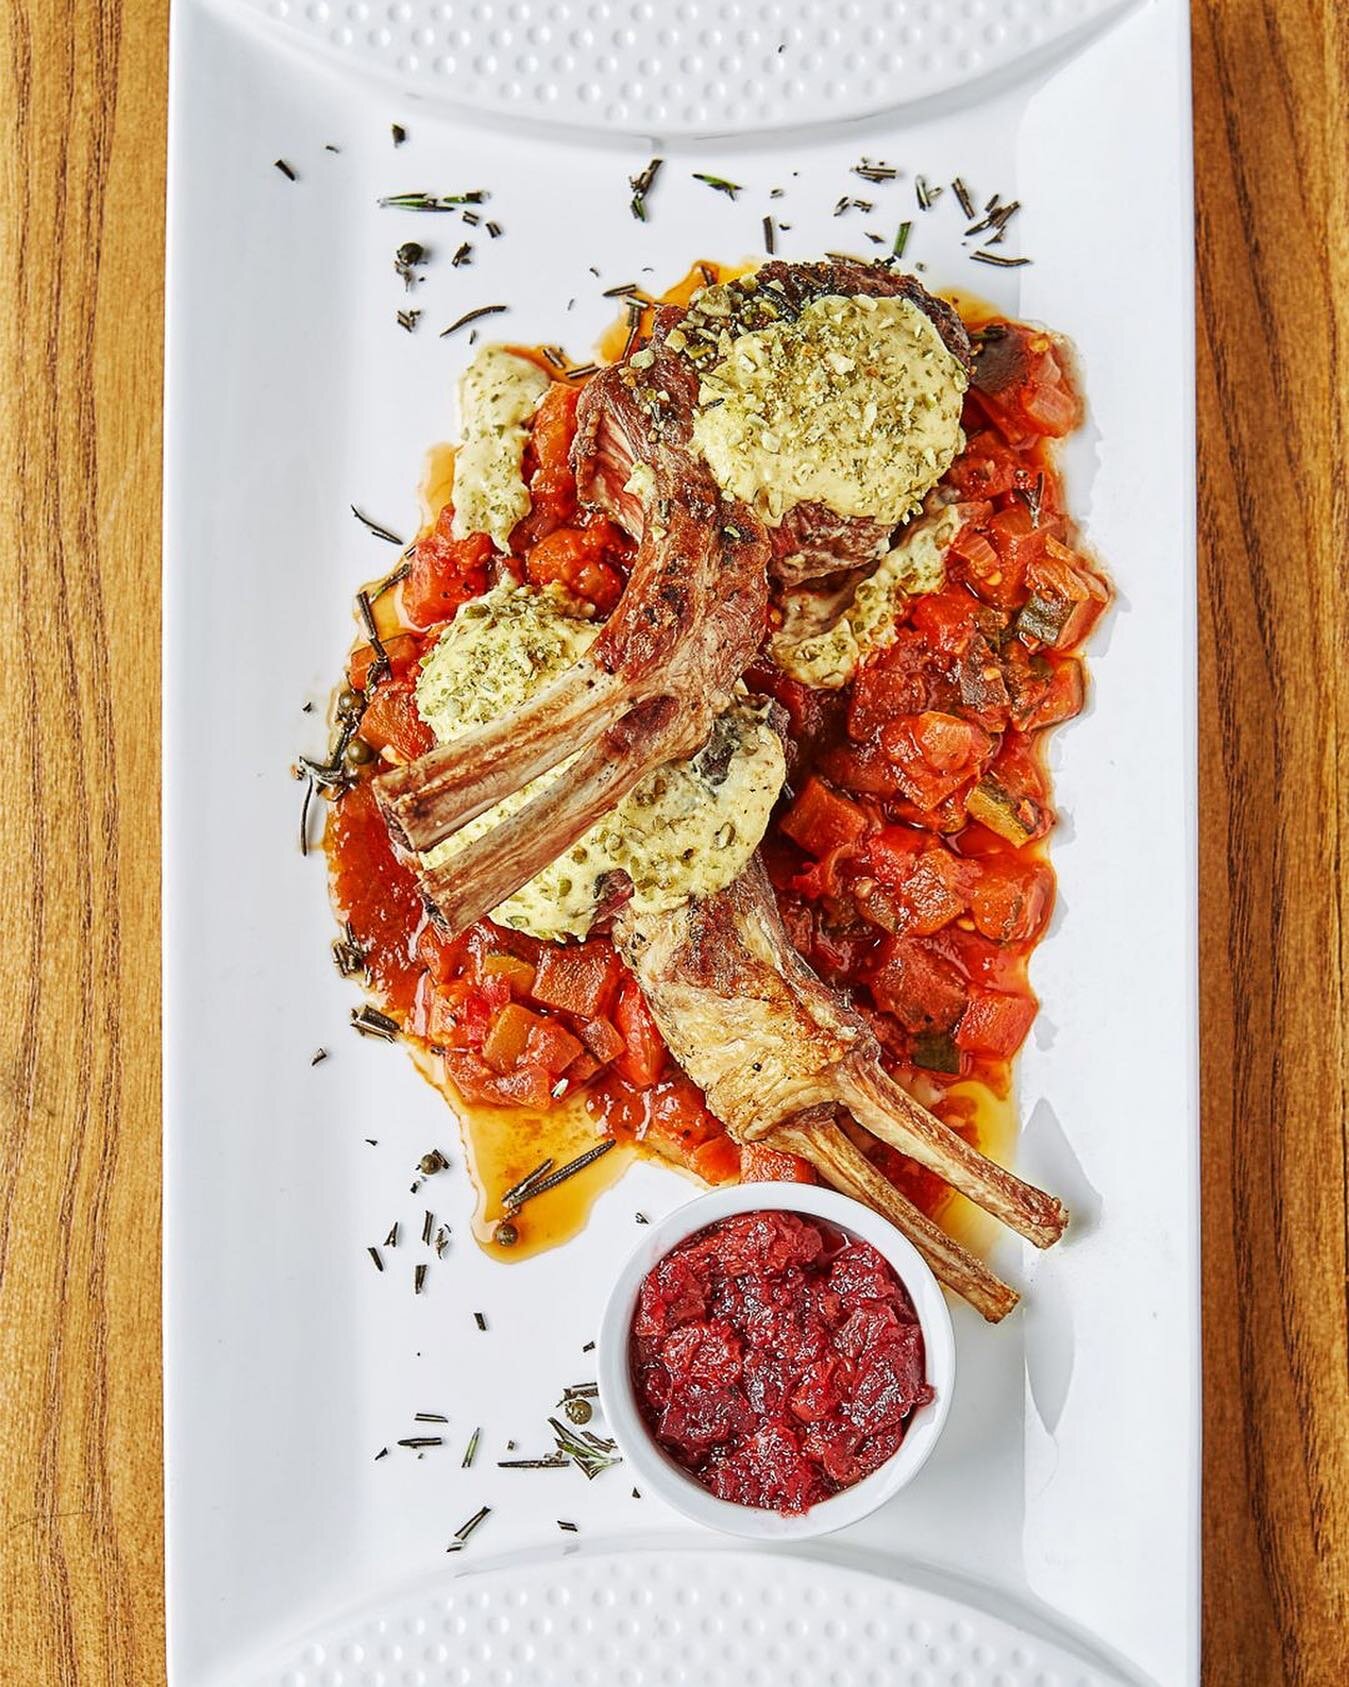 Make sure you try this! Chef Denis' Ontario Double Lamb Chops Pumpkin Seed Crumble will be the highlight of your dinner at The Vista!

Reserve Your Table Now at www.thevistarestaurant.ca 

.
.
.
#lamb #lamchops #lambdish #lambchop  #lambsofinstagram 